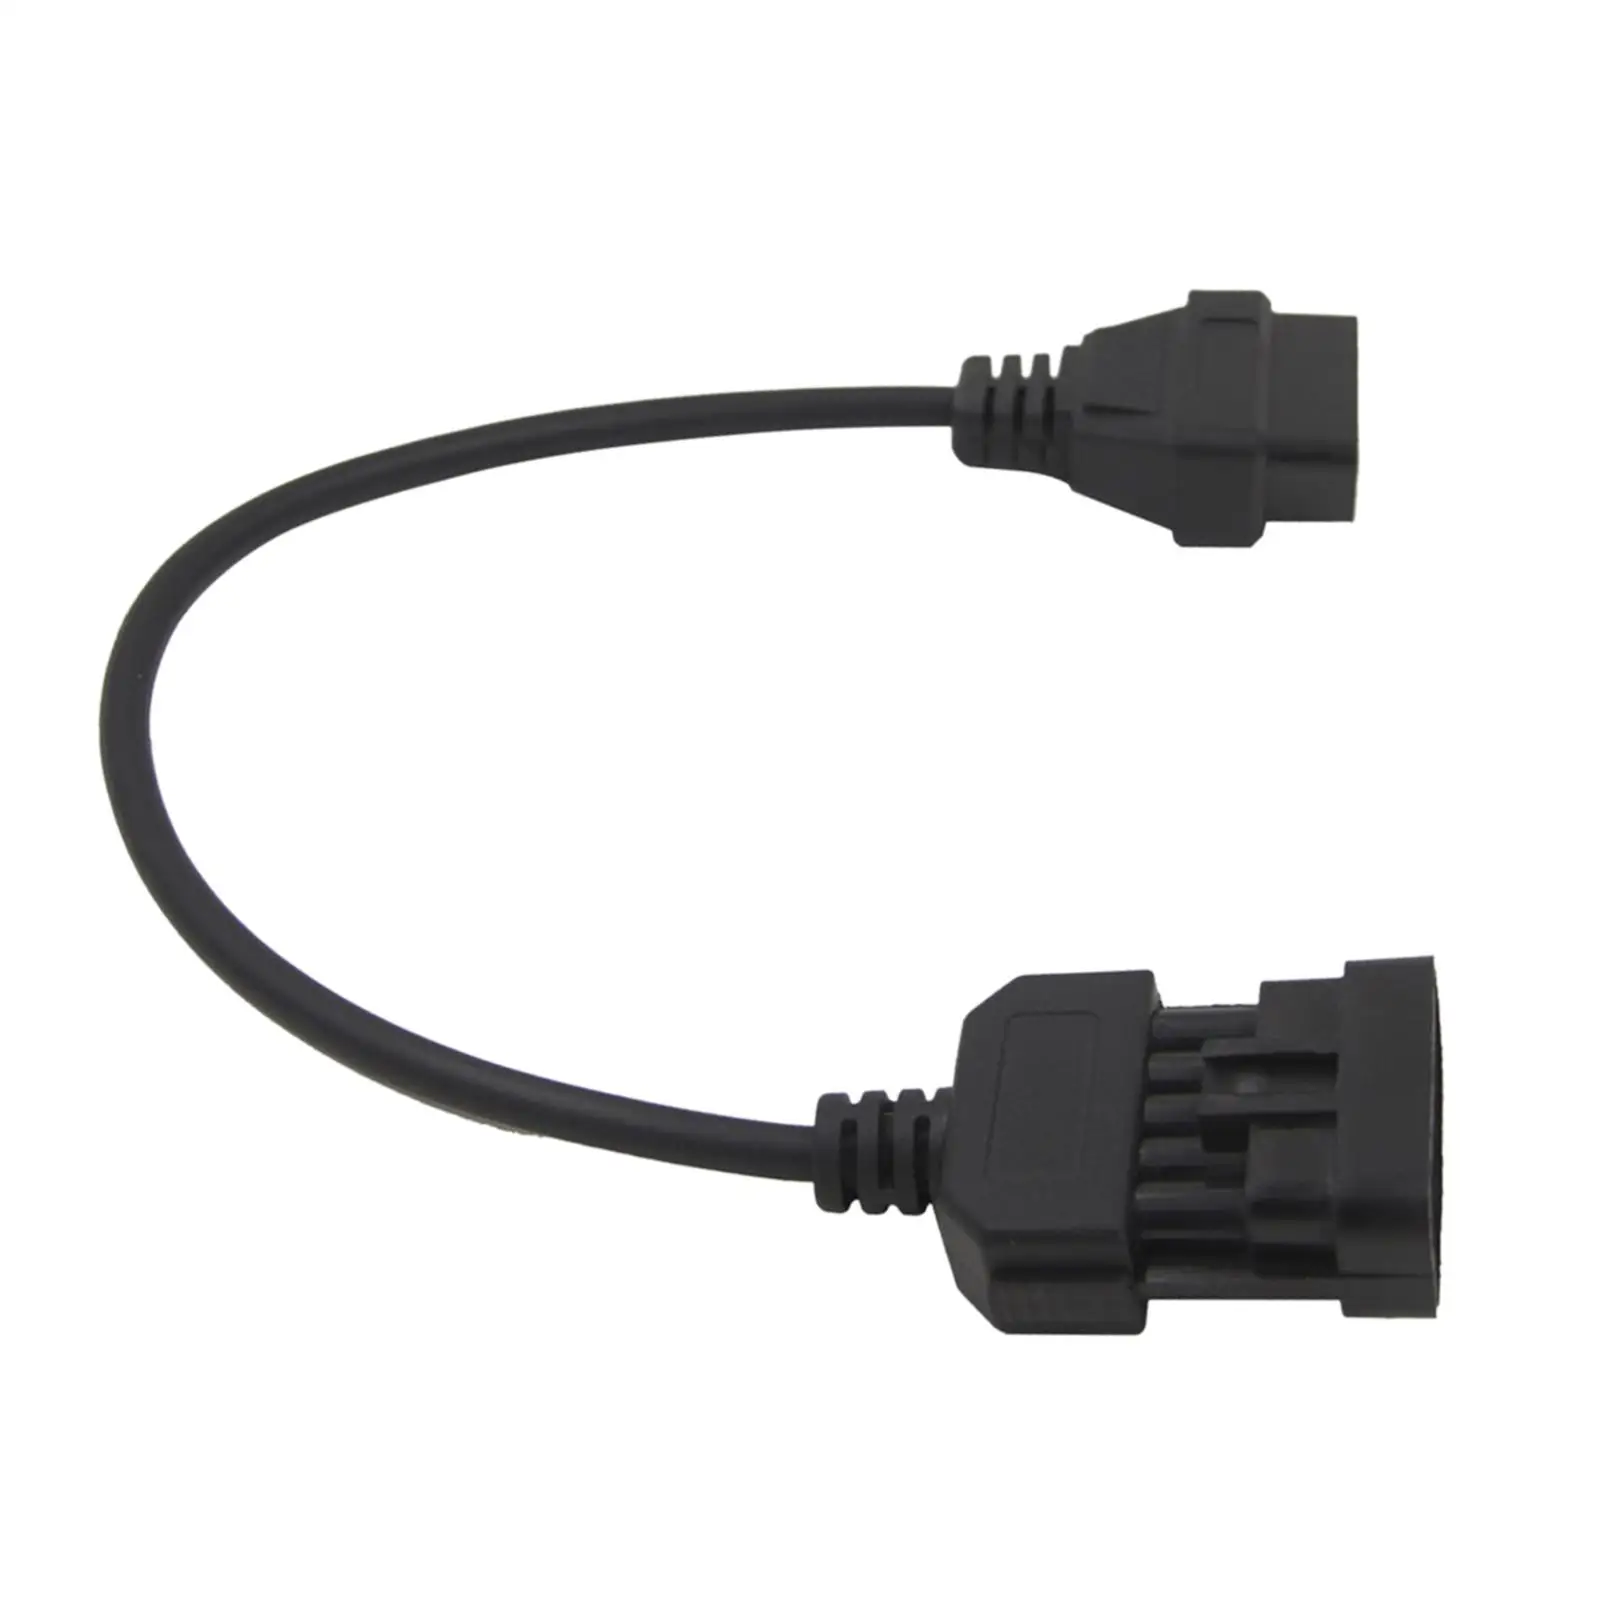 OBDII Extension Cable Replaces Male to Female Spare Parts Connector Auto Tool OBDII Adapter for 10Pin to OBDII 16Pin